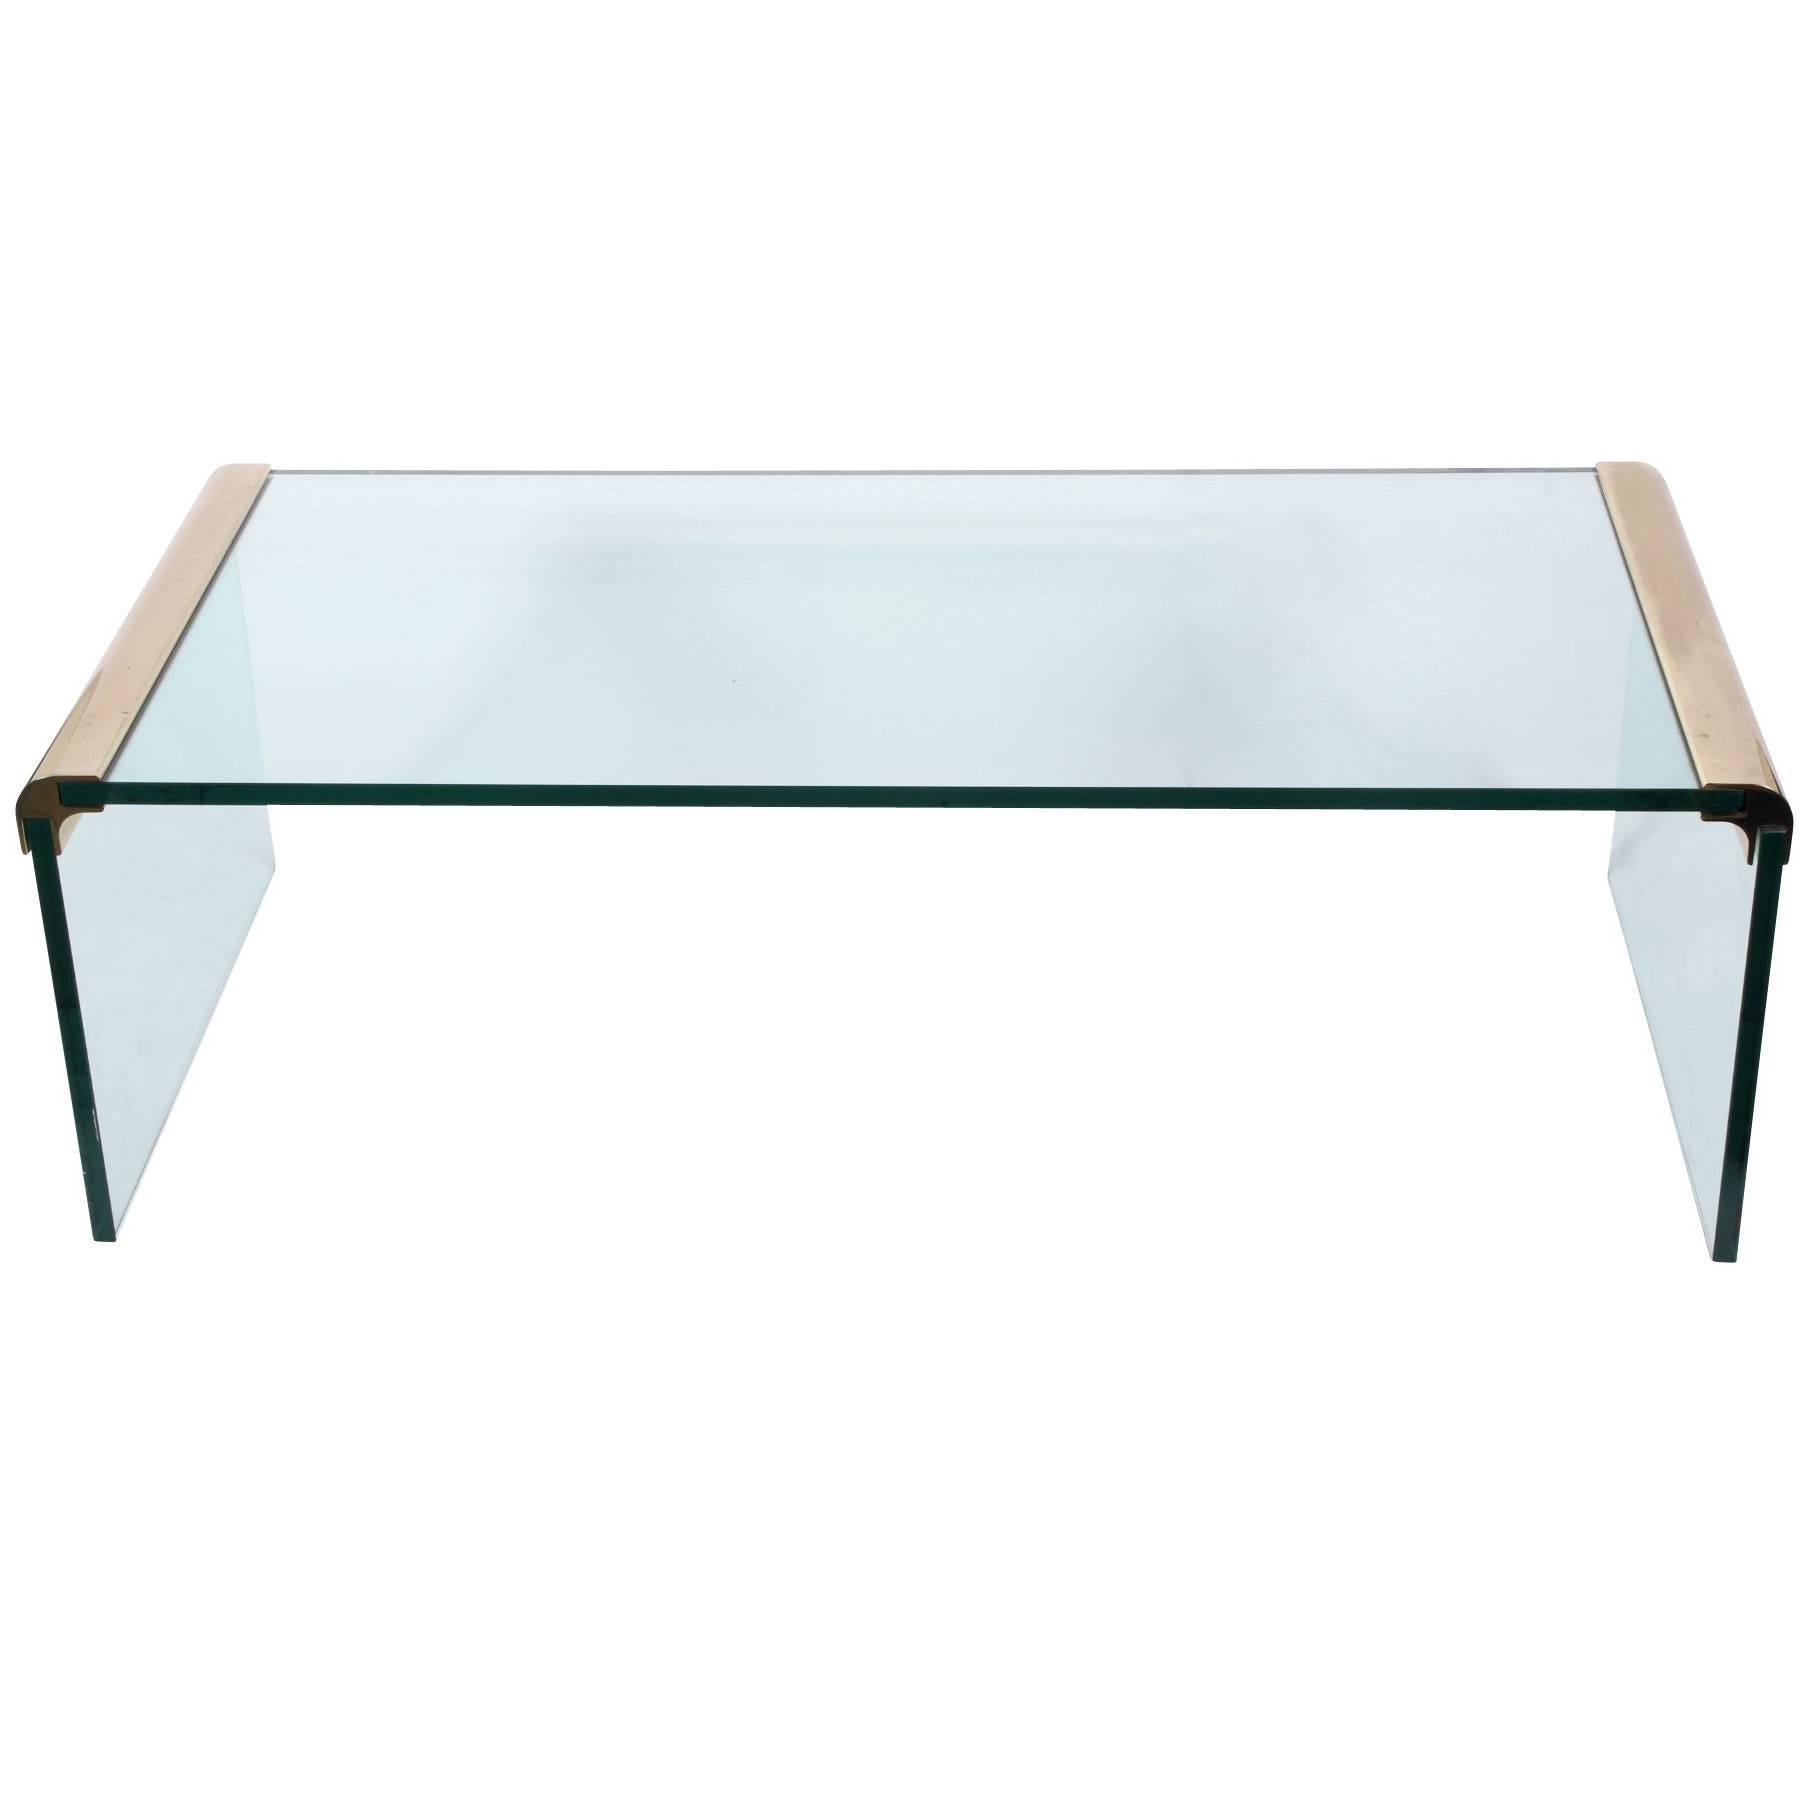 1970s Pace Collection "Waterfall" Coffee Table